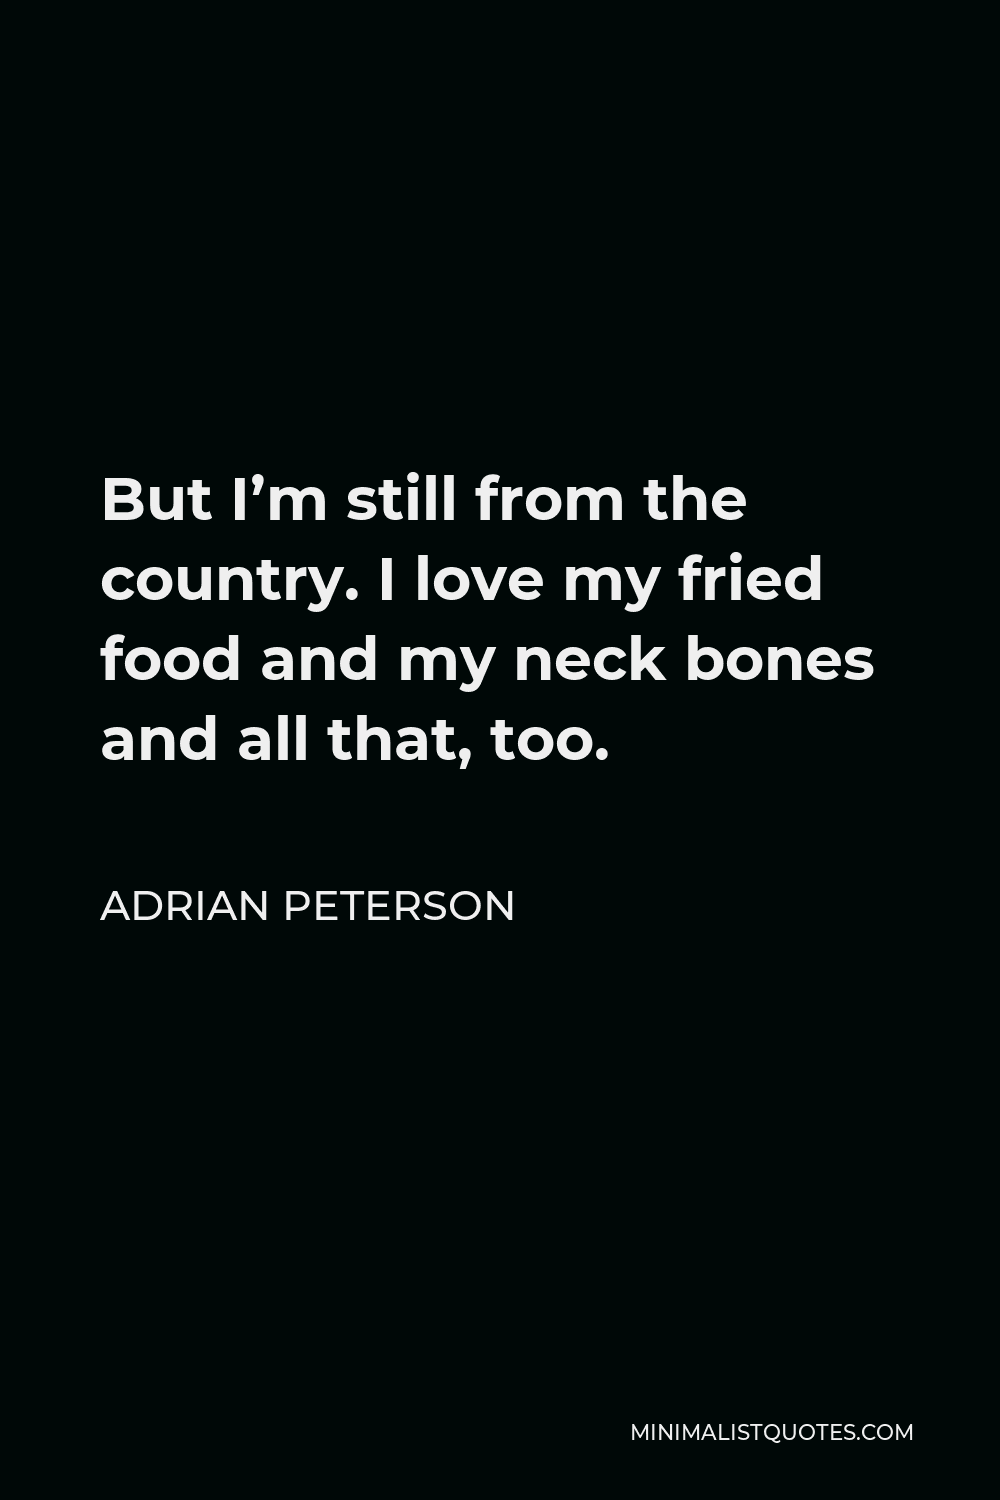 Adrian Peterson Quote - But I’m still from the country. I love my fried food and my neck bones and all that, too.